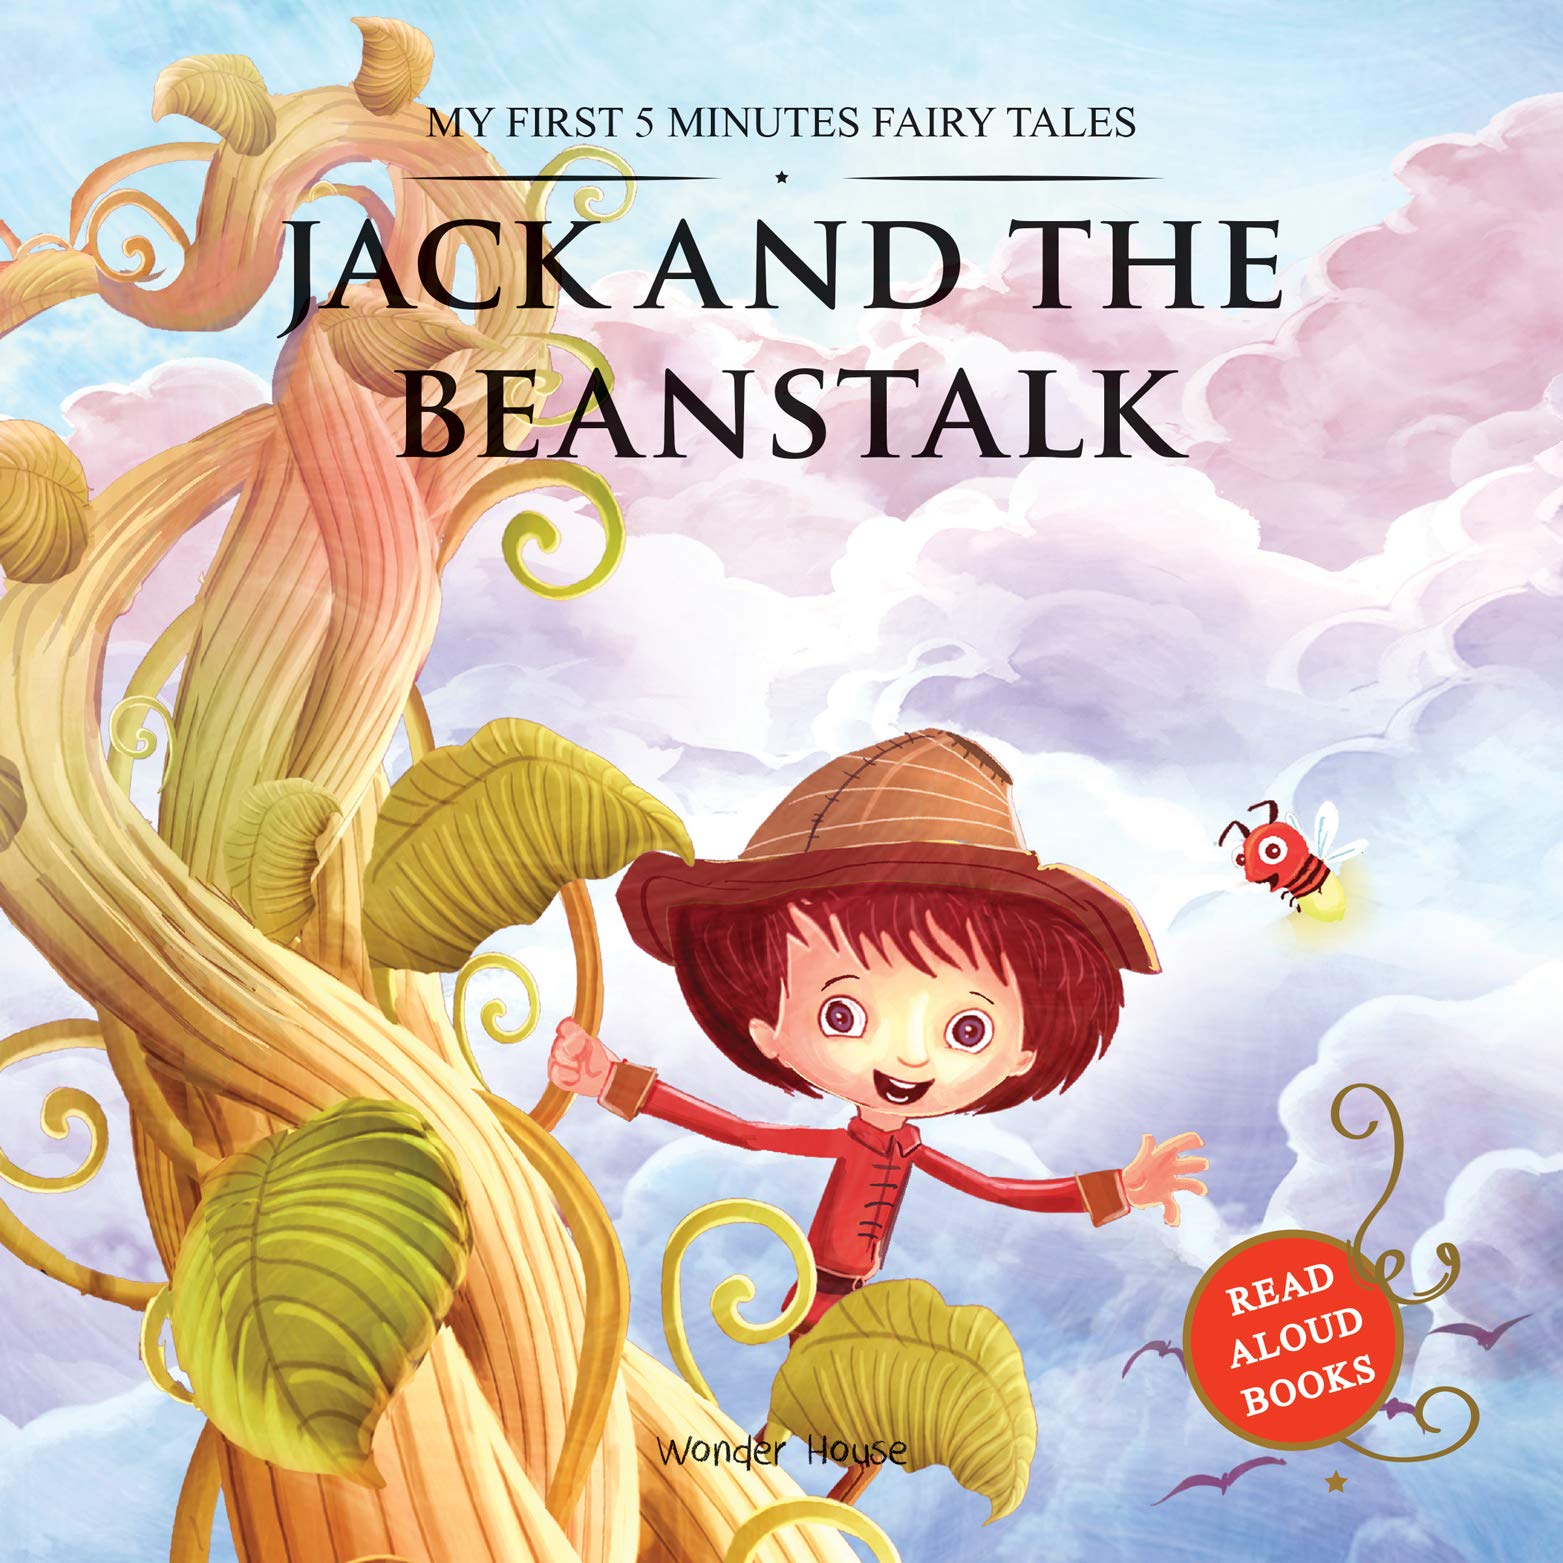 My First 5 Minutes Fairy Tales Jack and the Beanstalk (Read Aloud Books)